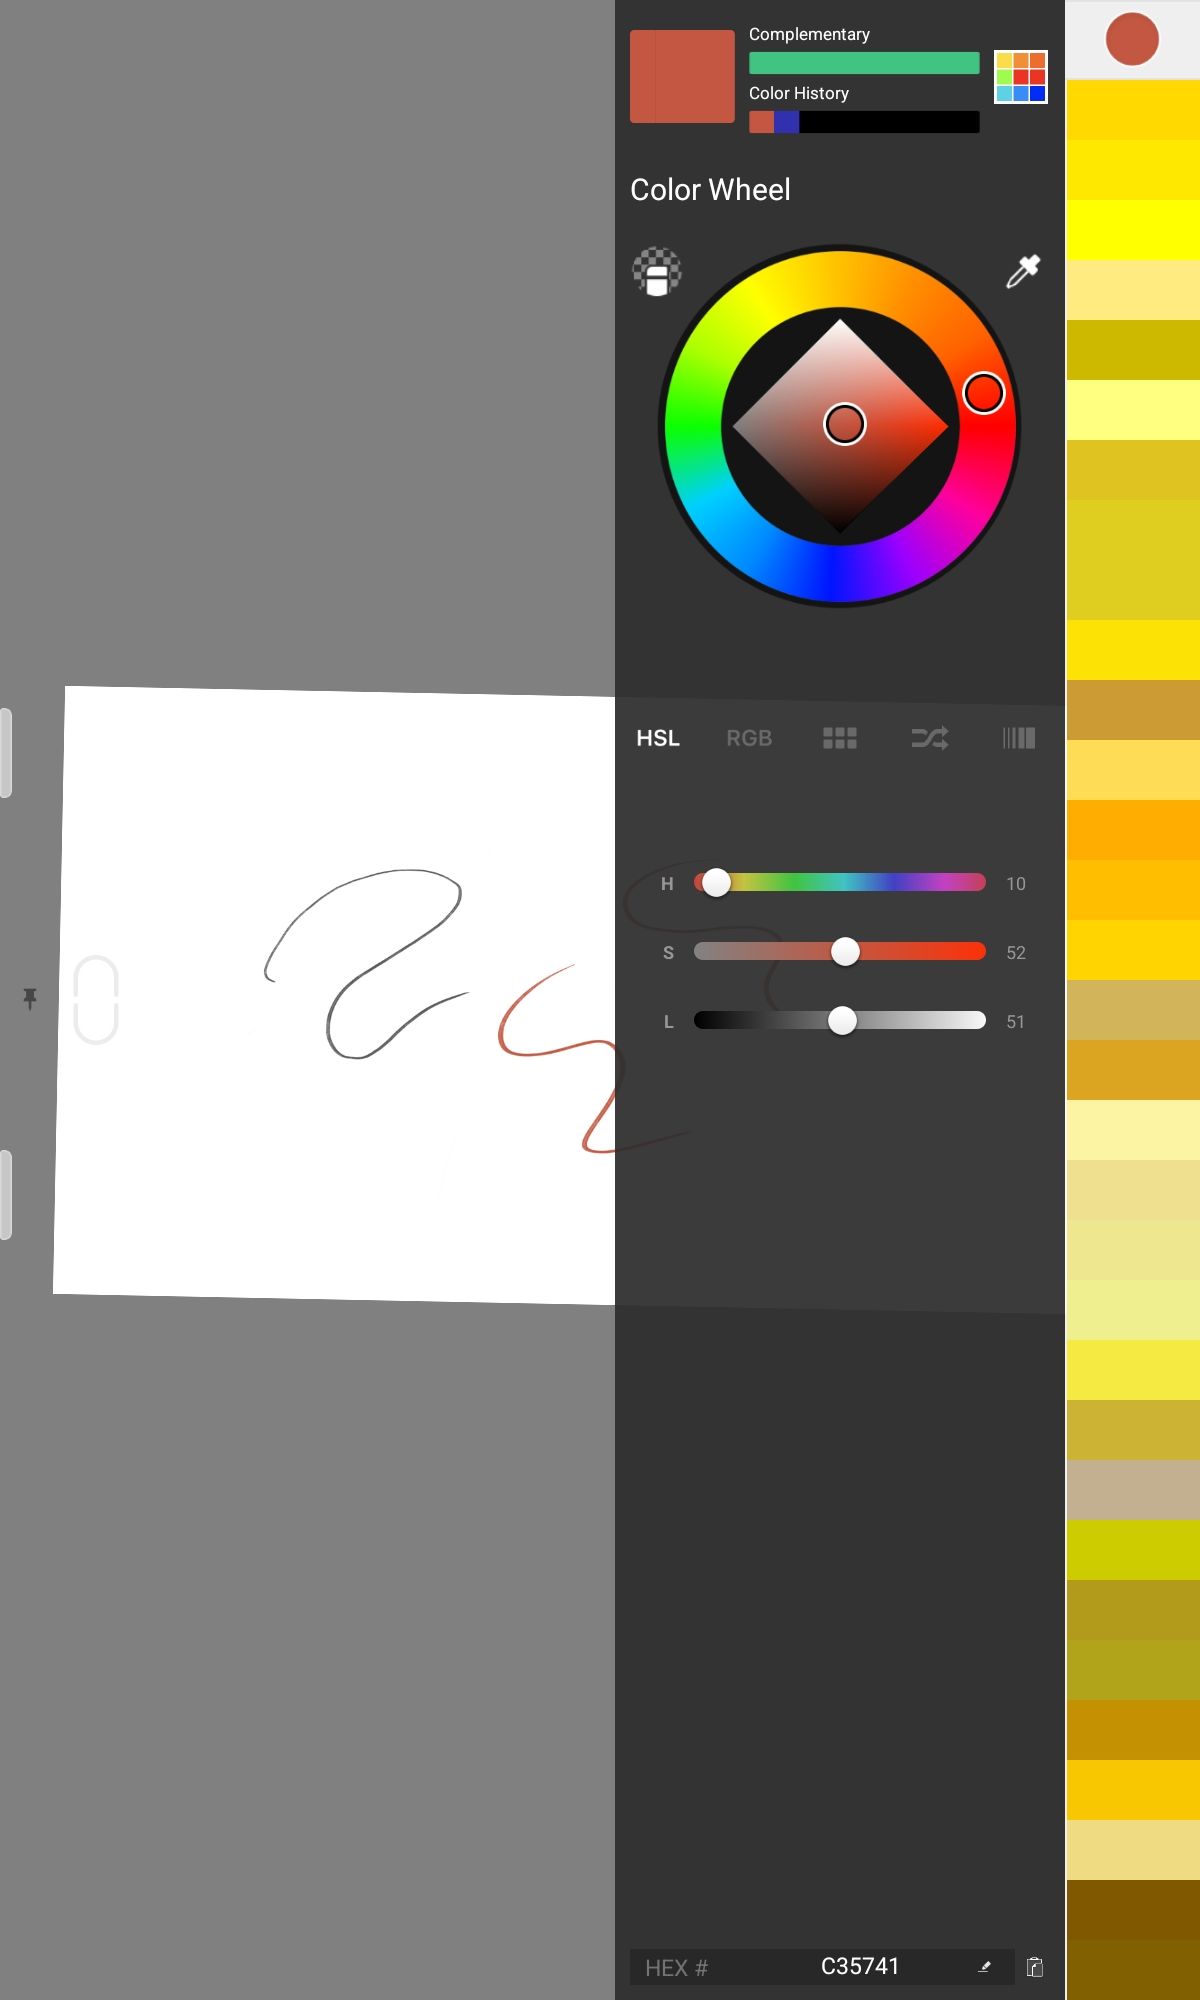 Sketchbook has added a complementary color indicator above the color wheel.